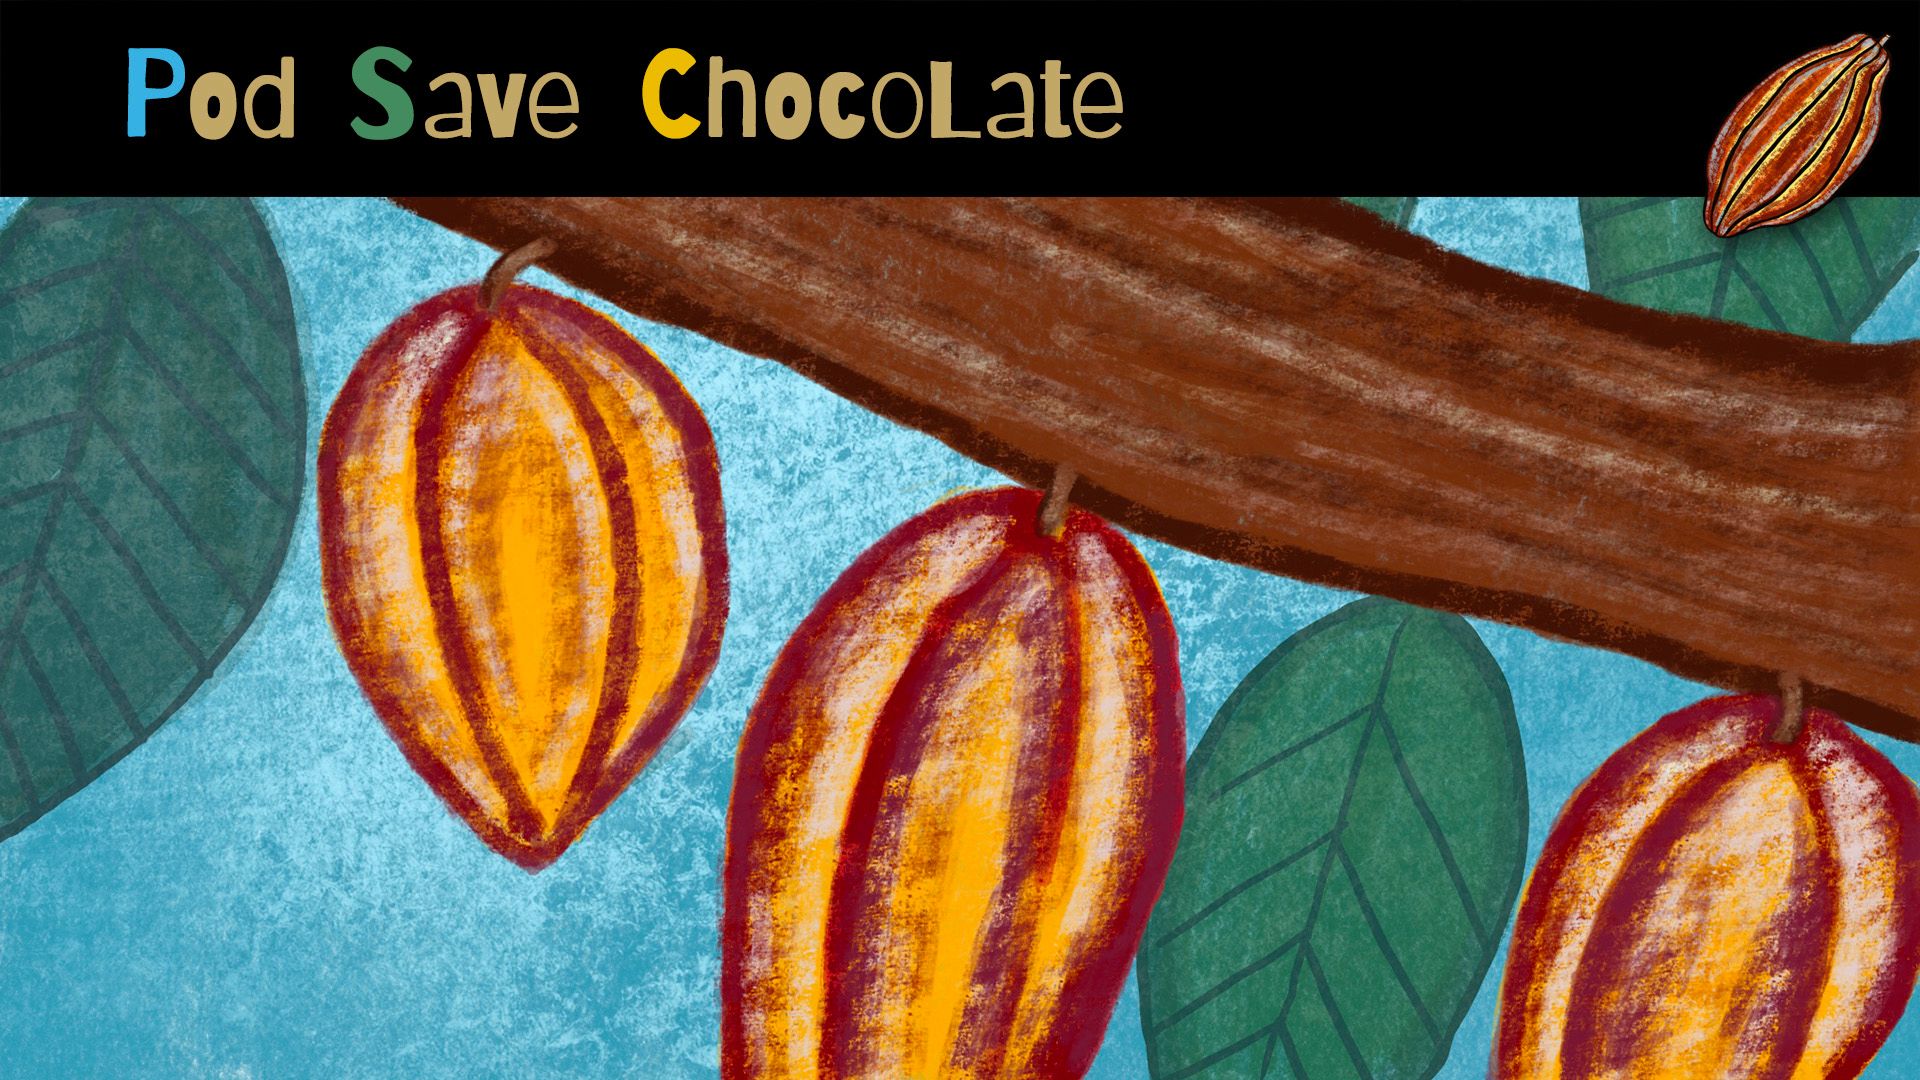 Pod Save Chocolate Calendar and Archive